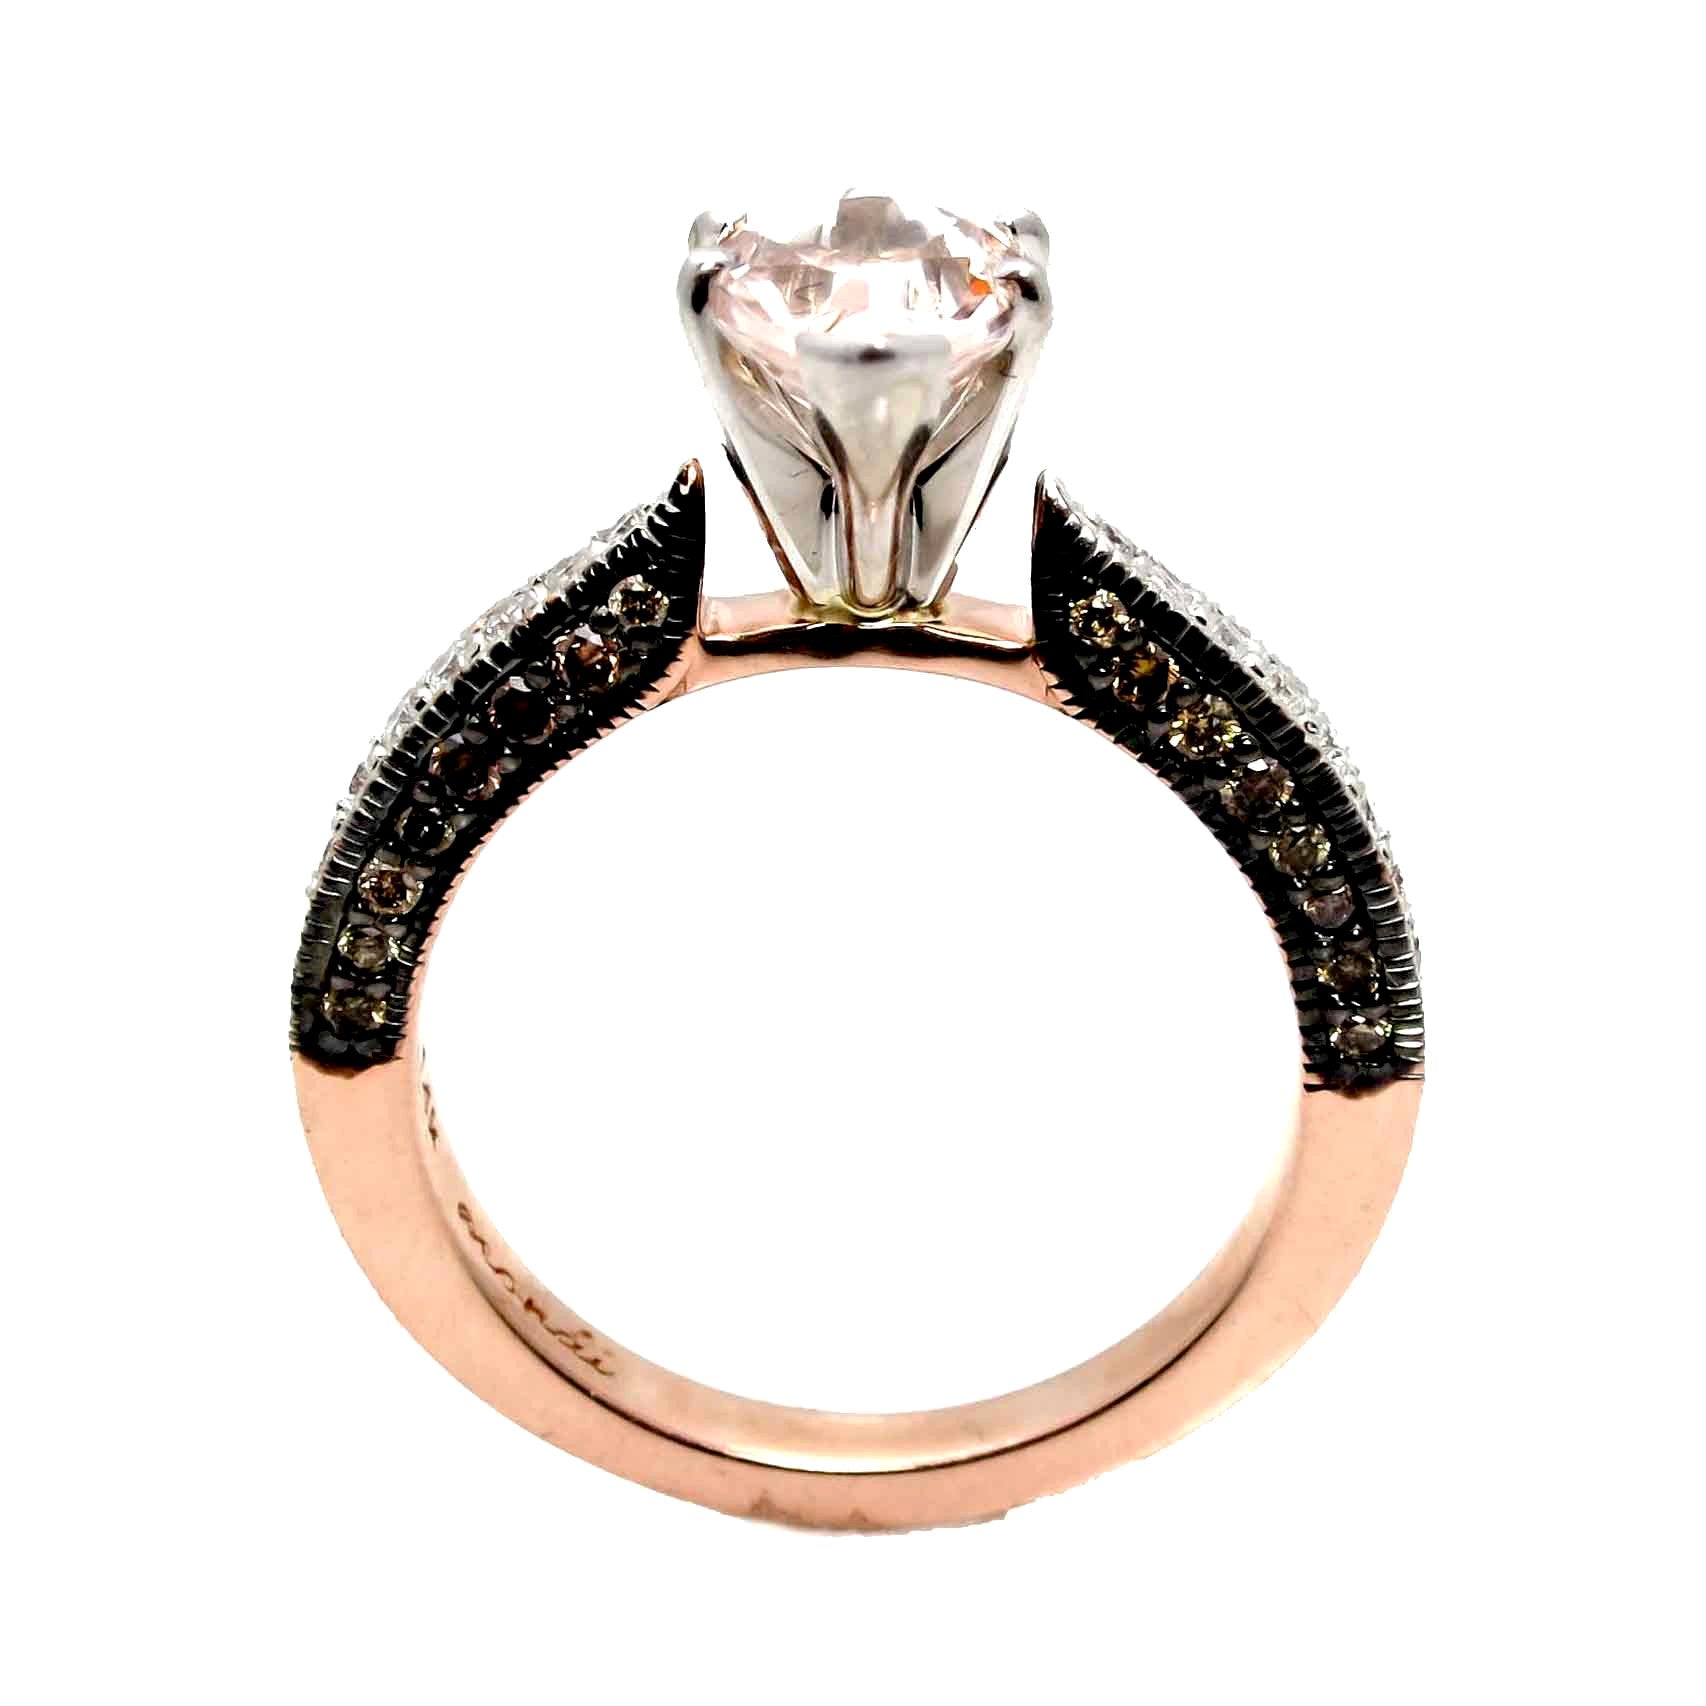 Pear Shaped Morganite Engagement Solitaire, White & Fancy Brown Diamonds, Rose Gold Anniversary Ring - PSMG94614